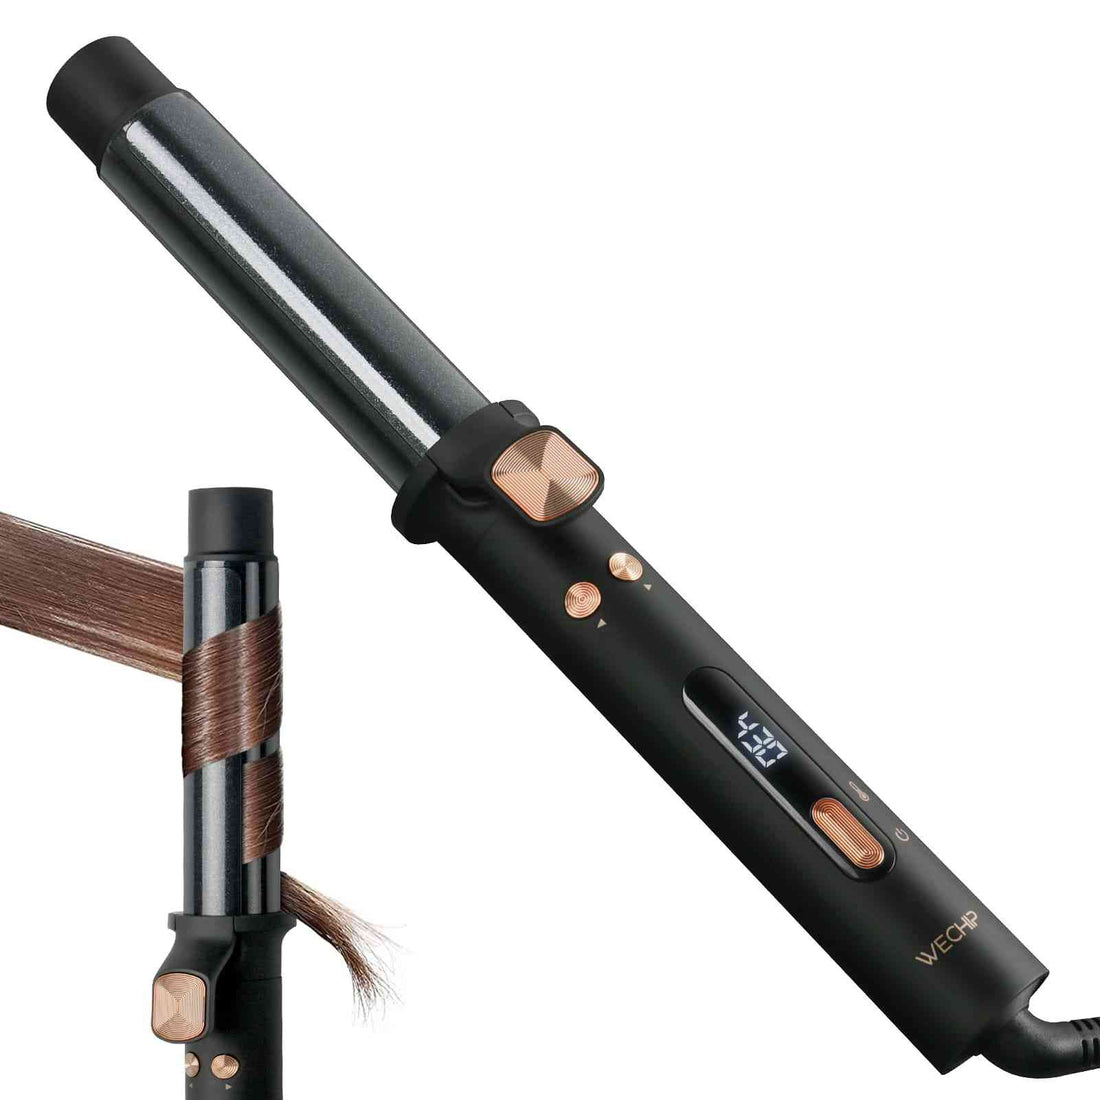 Wechip Self-Rotating Curling Iron